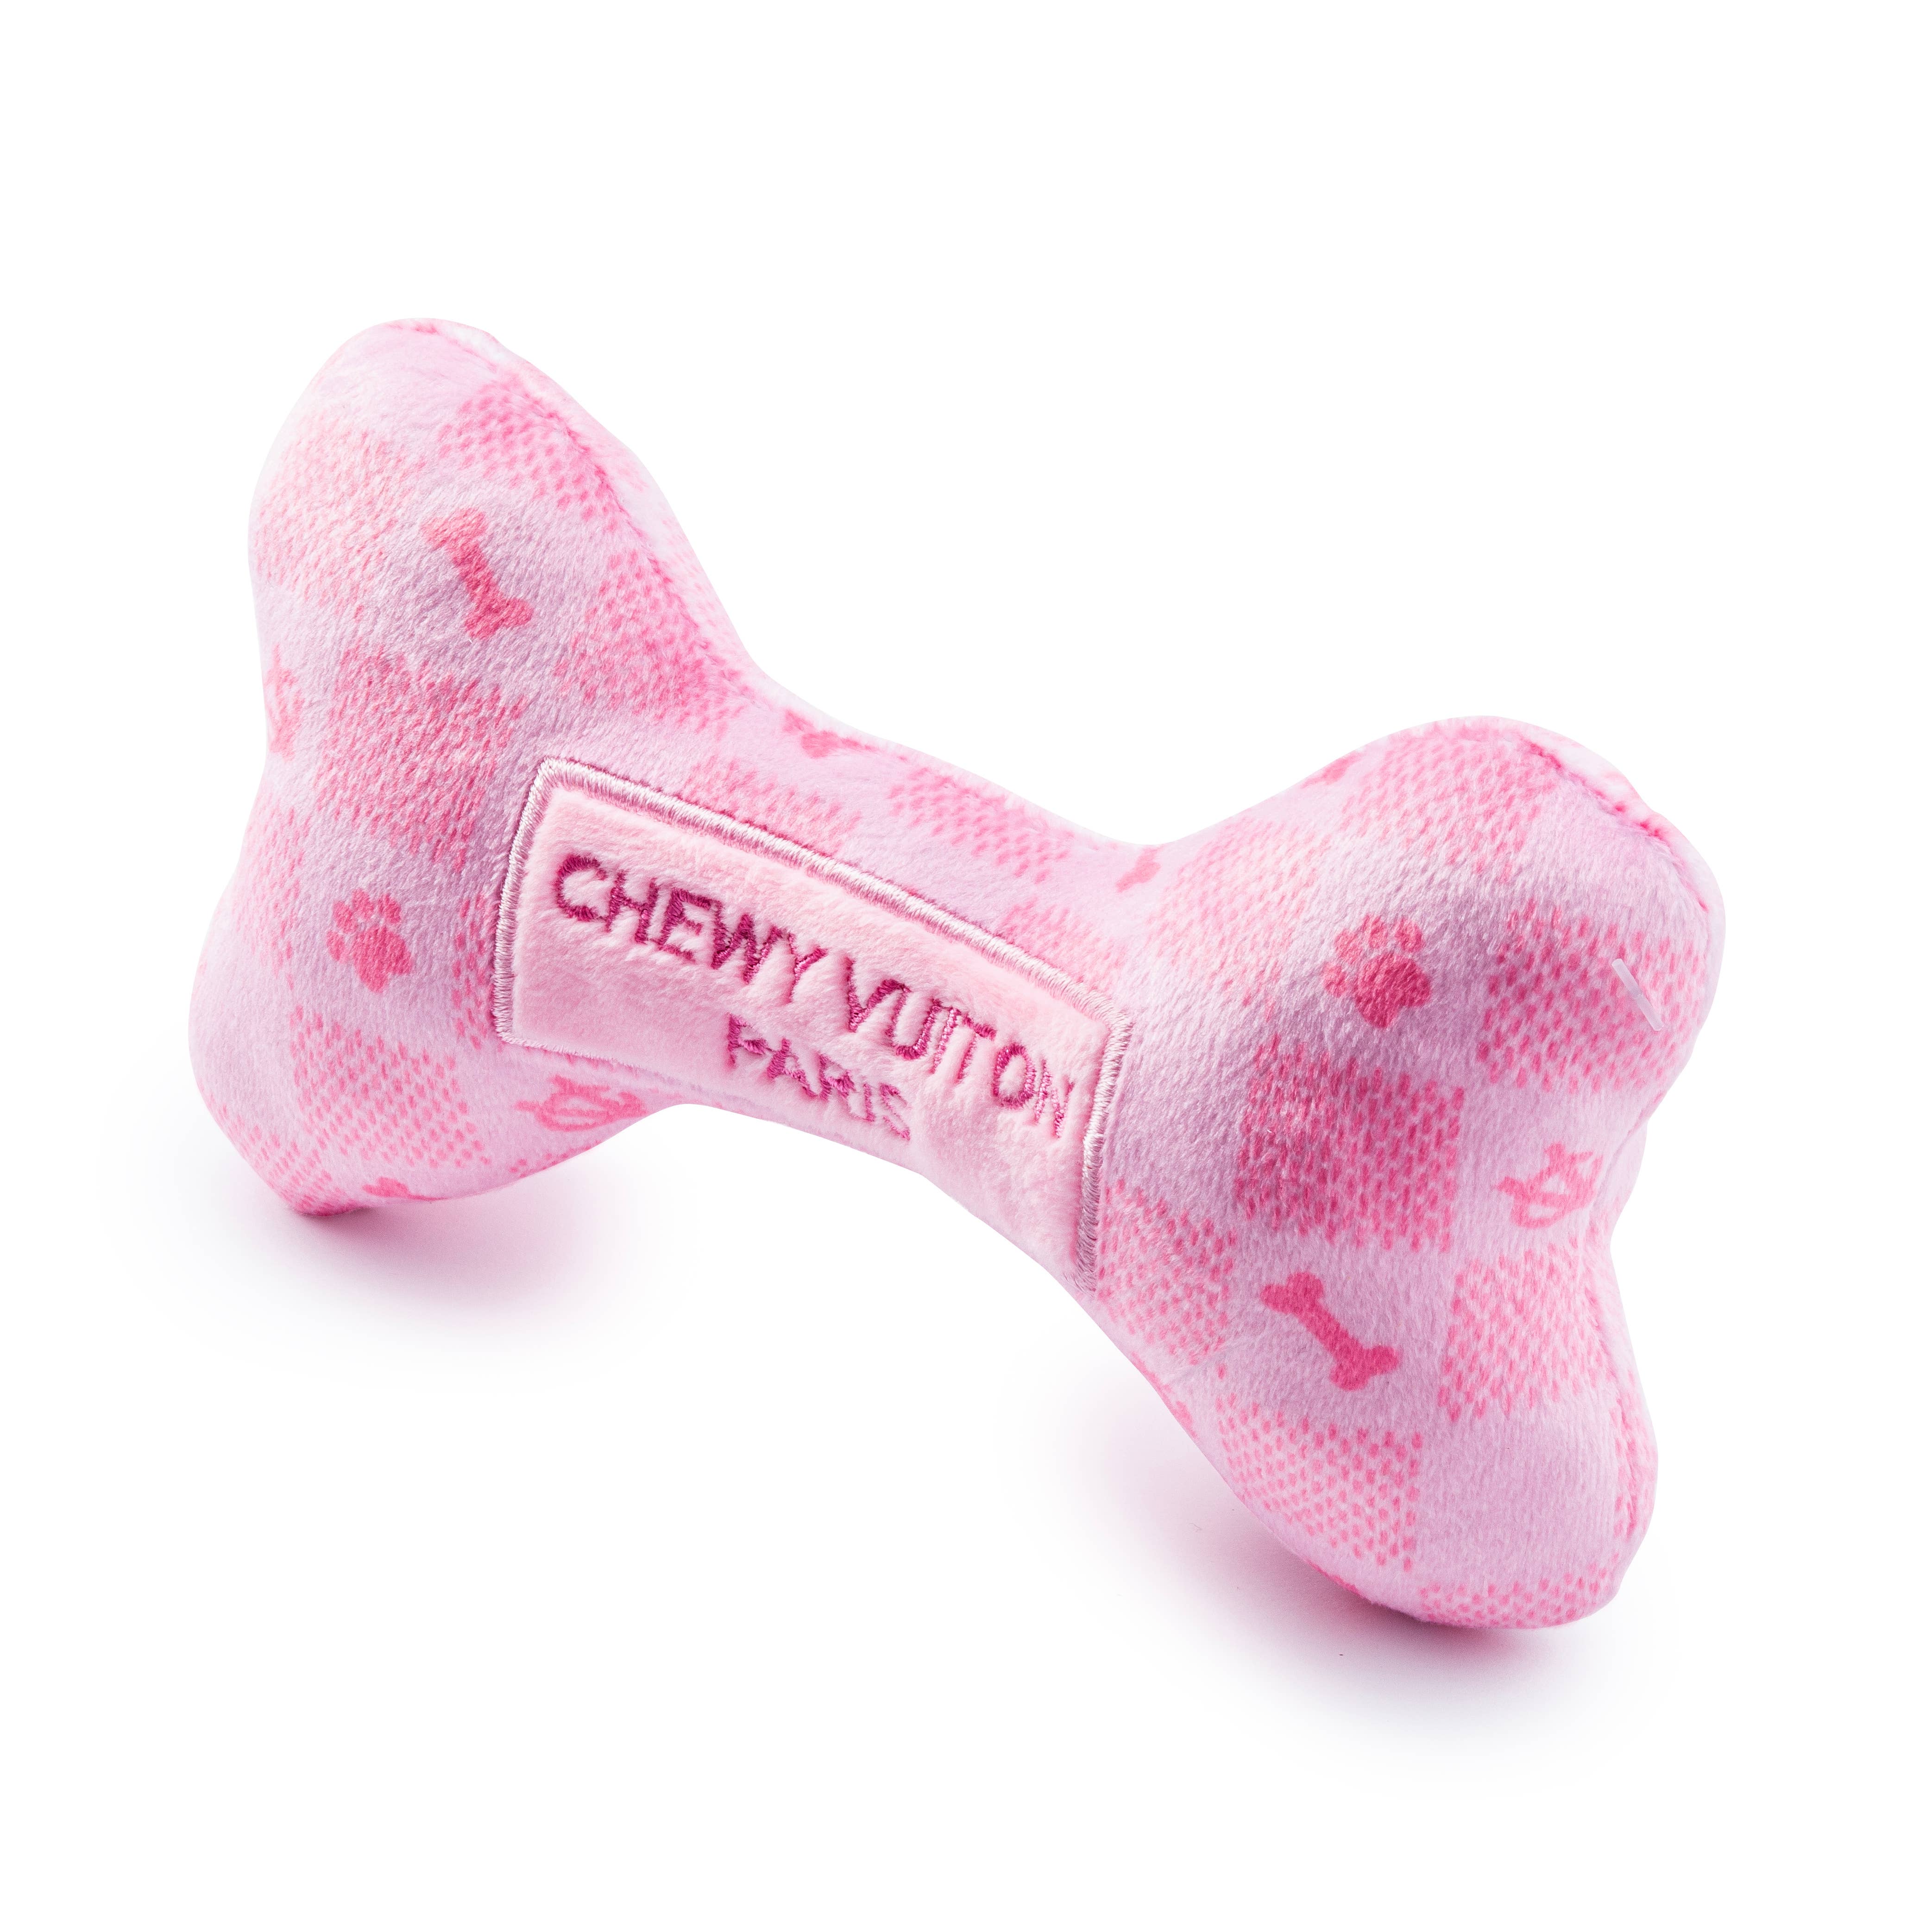 Pink Checker Chewy Vuiton Bone by Haute Diggity Dog: Large